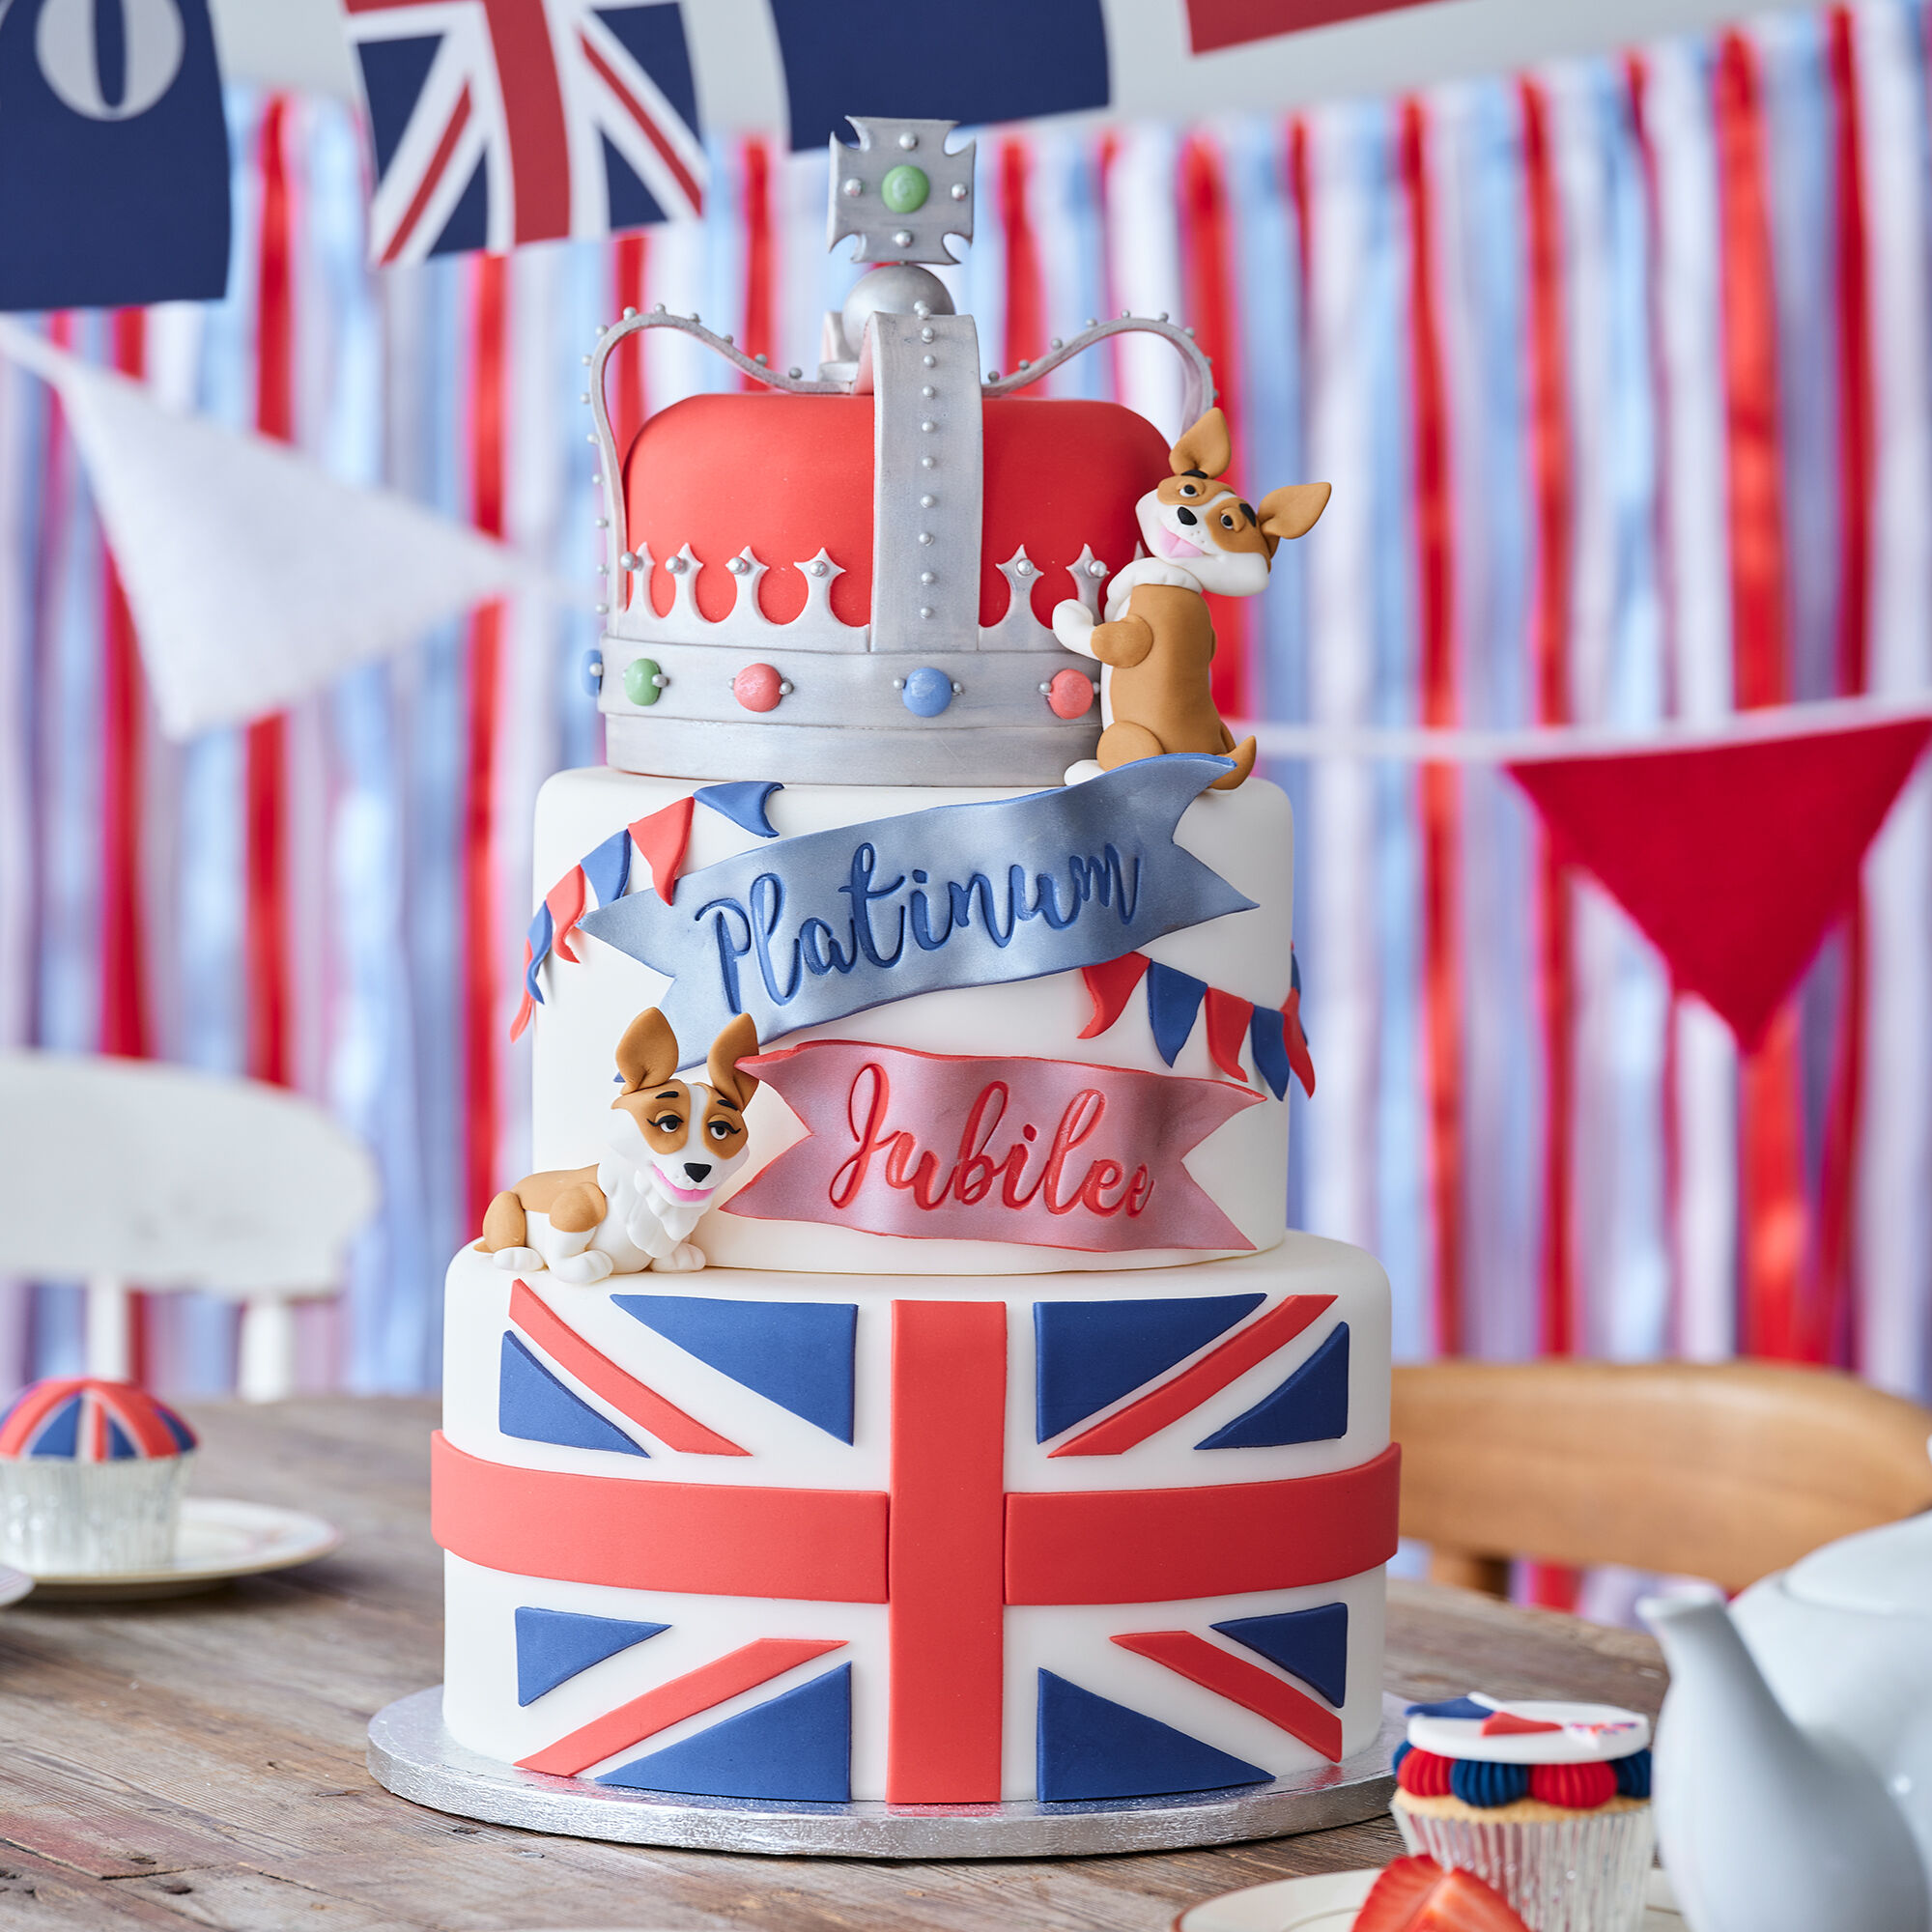 Wedding Cakes North London | Wedding Cake Makers And Cake Toppers